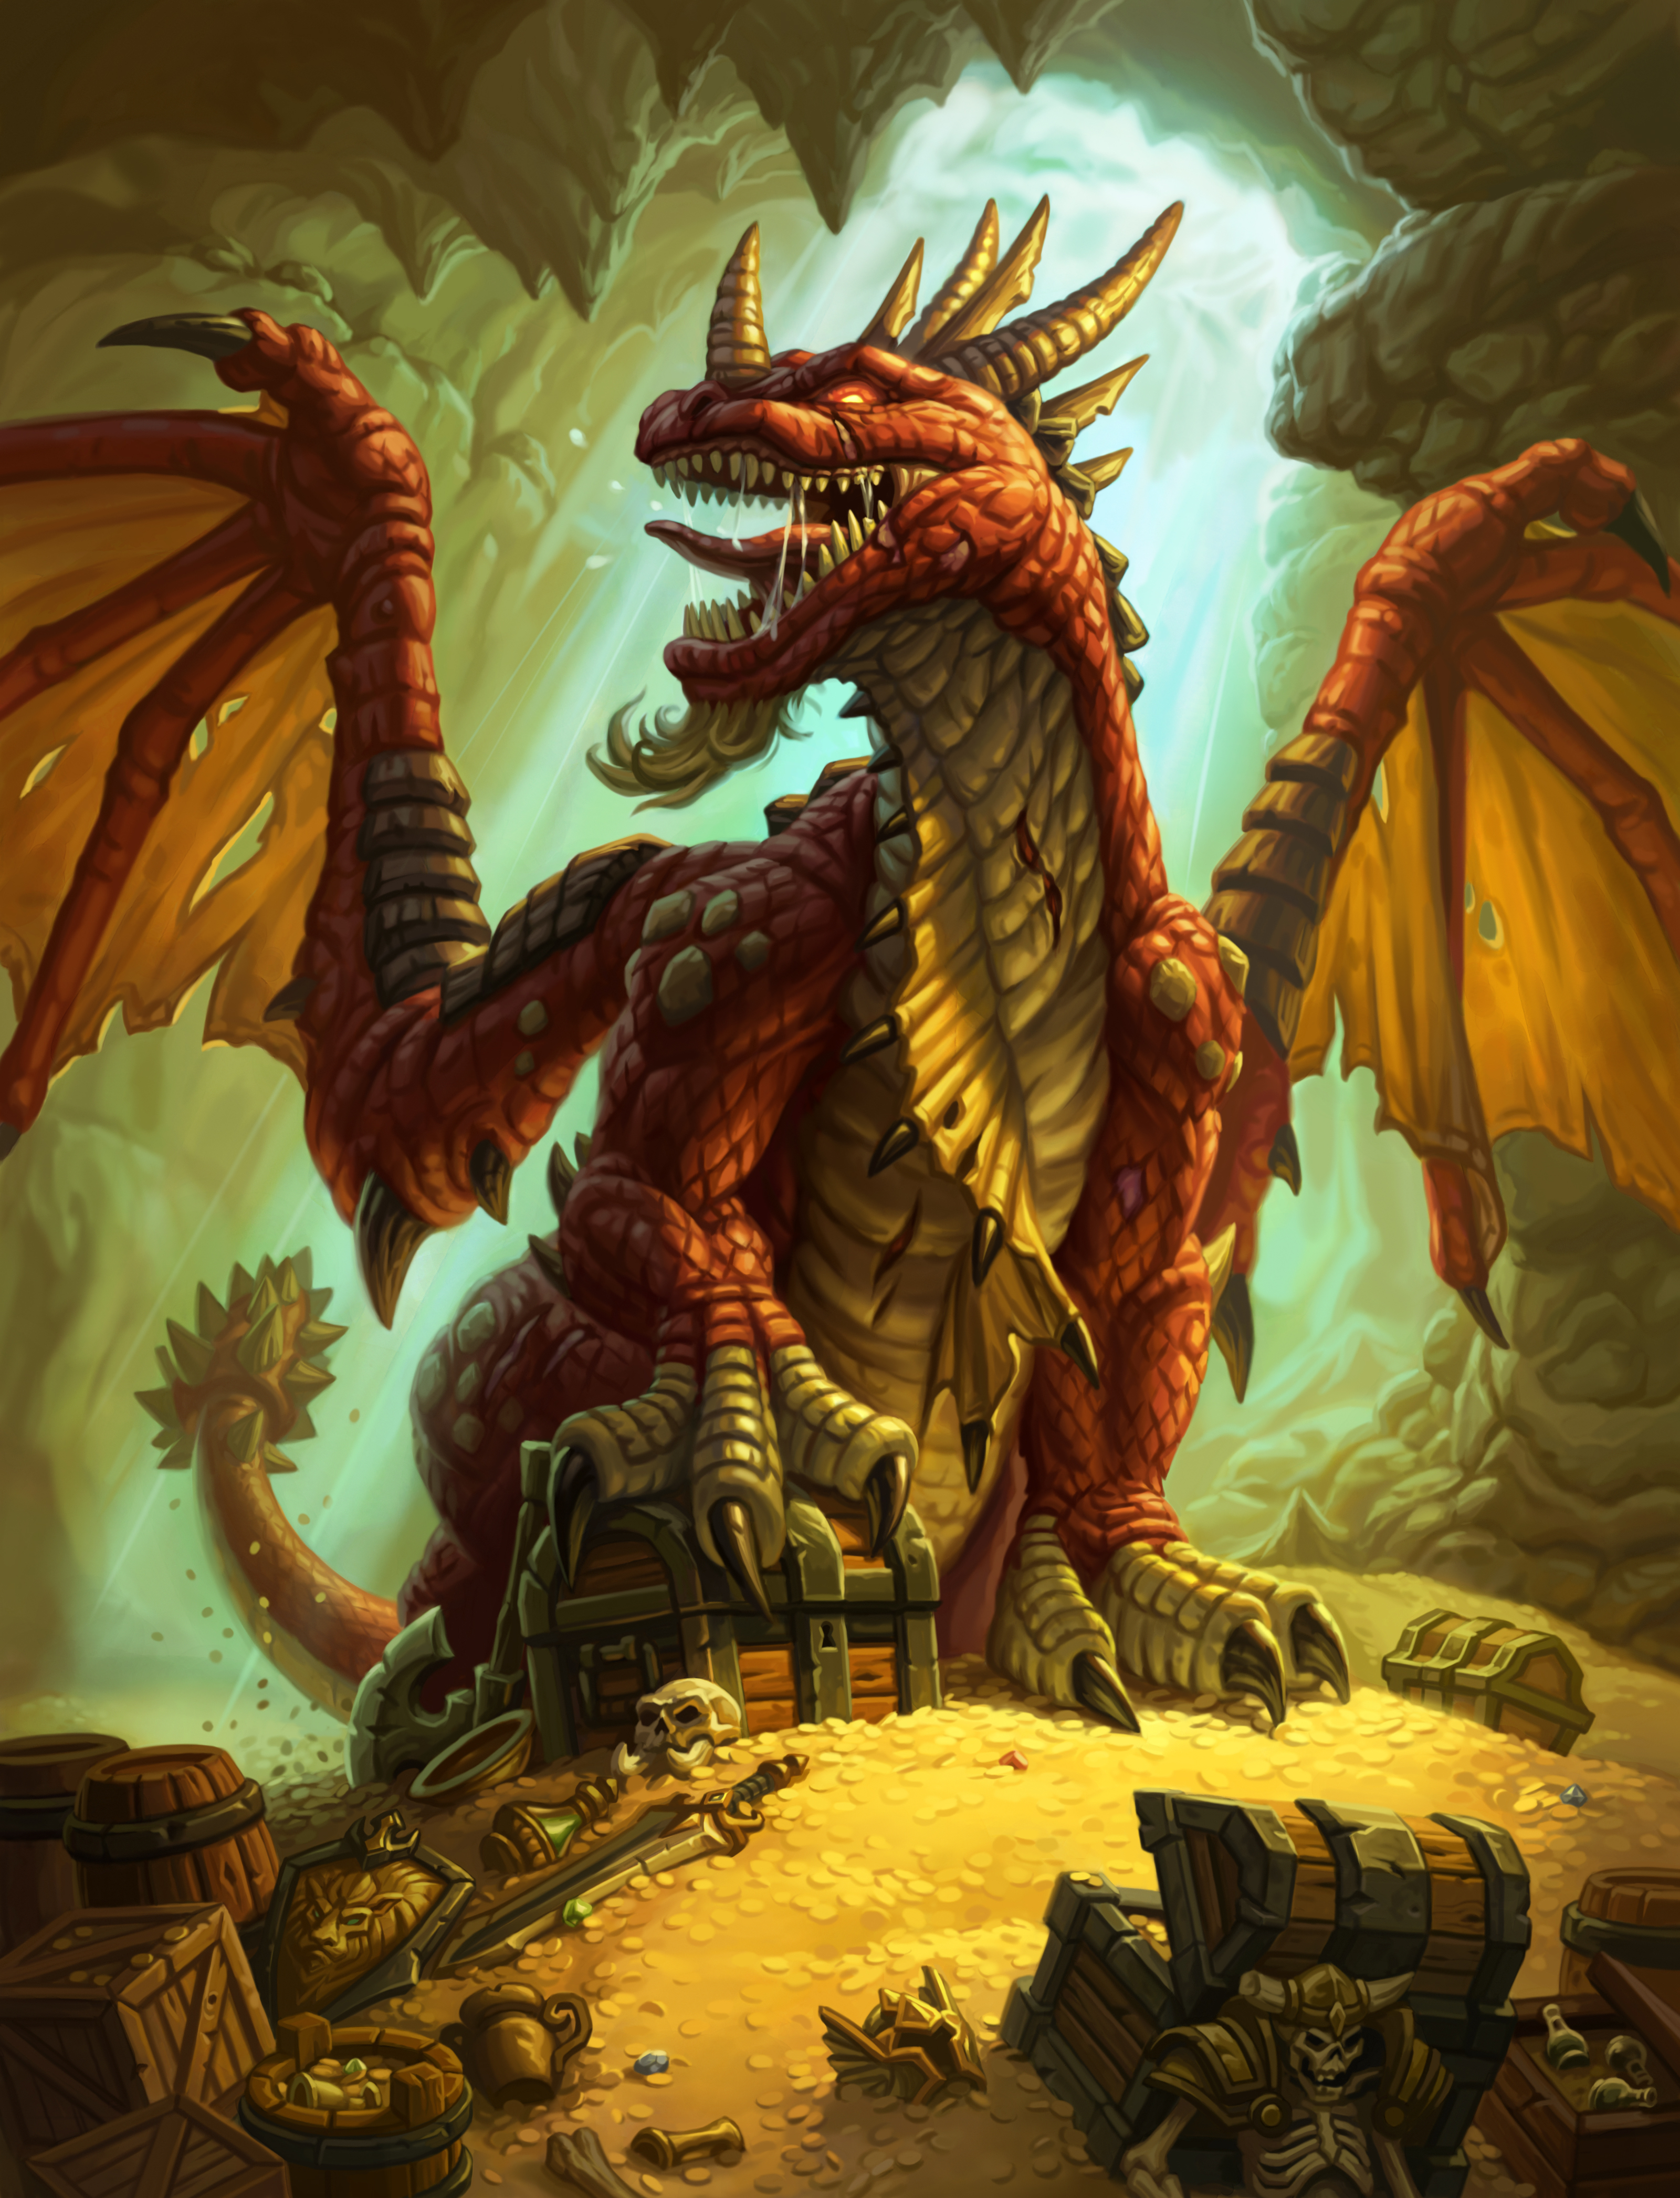 General 3200x4186 Hearthstone: Heroes of Warcraft Hearthstone: Kobolds and Catacombs video games dragon